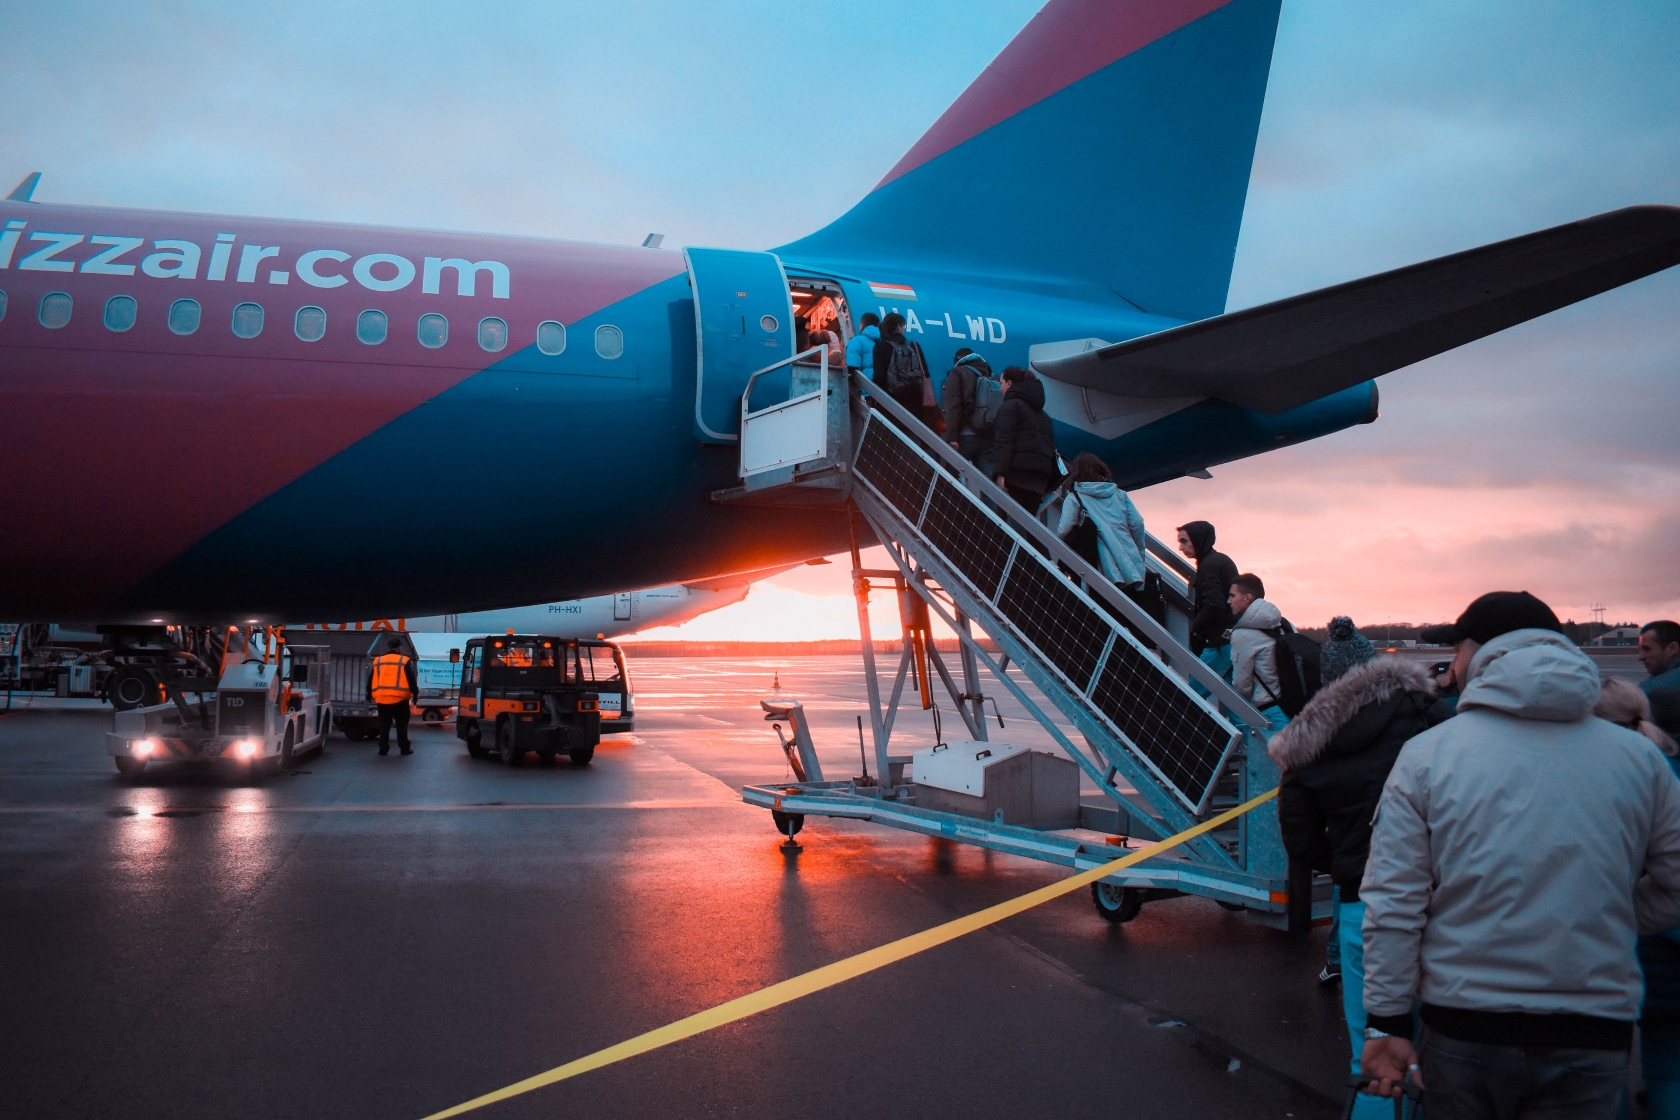 The back end of an aeroplane, on the tarmac at dusk. Portable stairs lead up to the plane's rear door and a group of people are queued up to get on board.